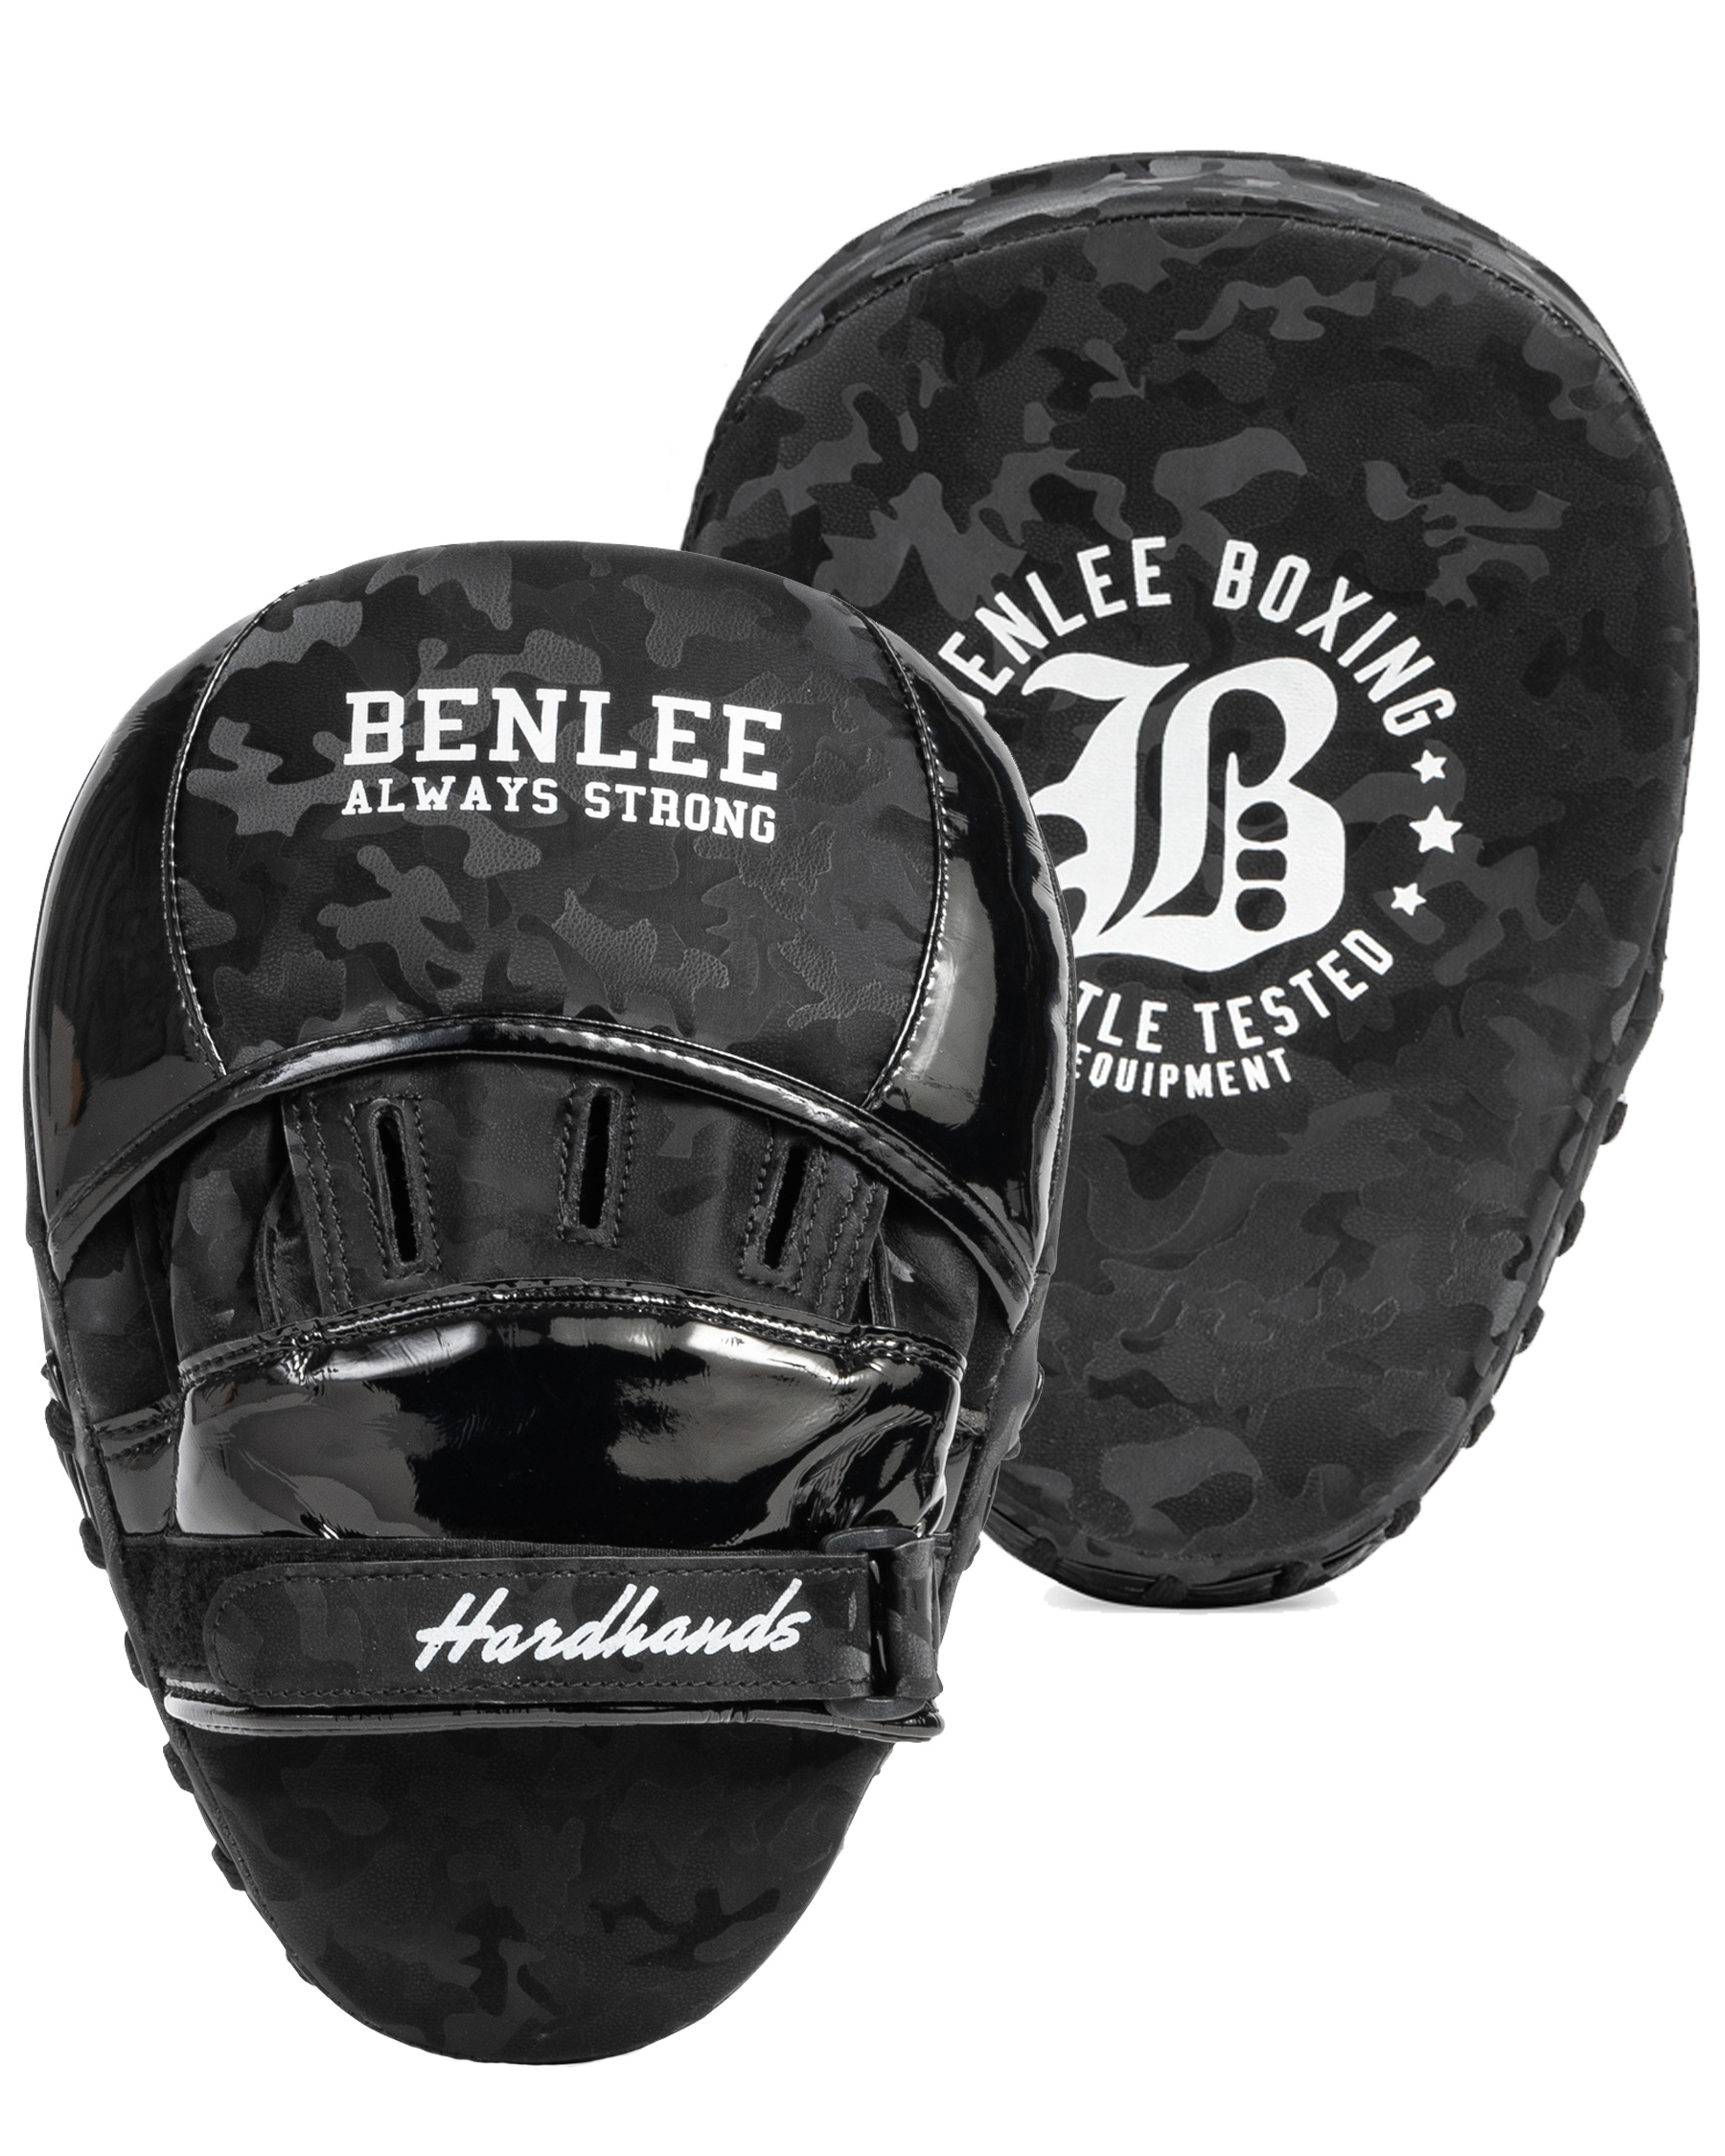 BenLee boxing pads Hardhands